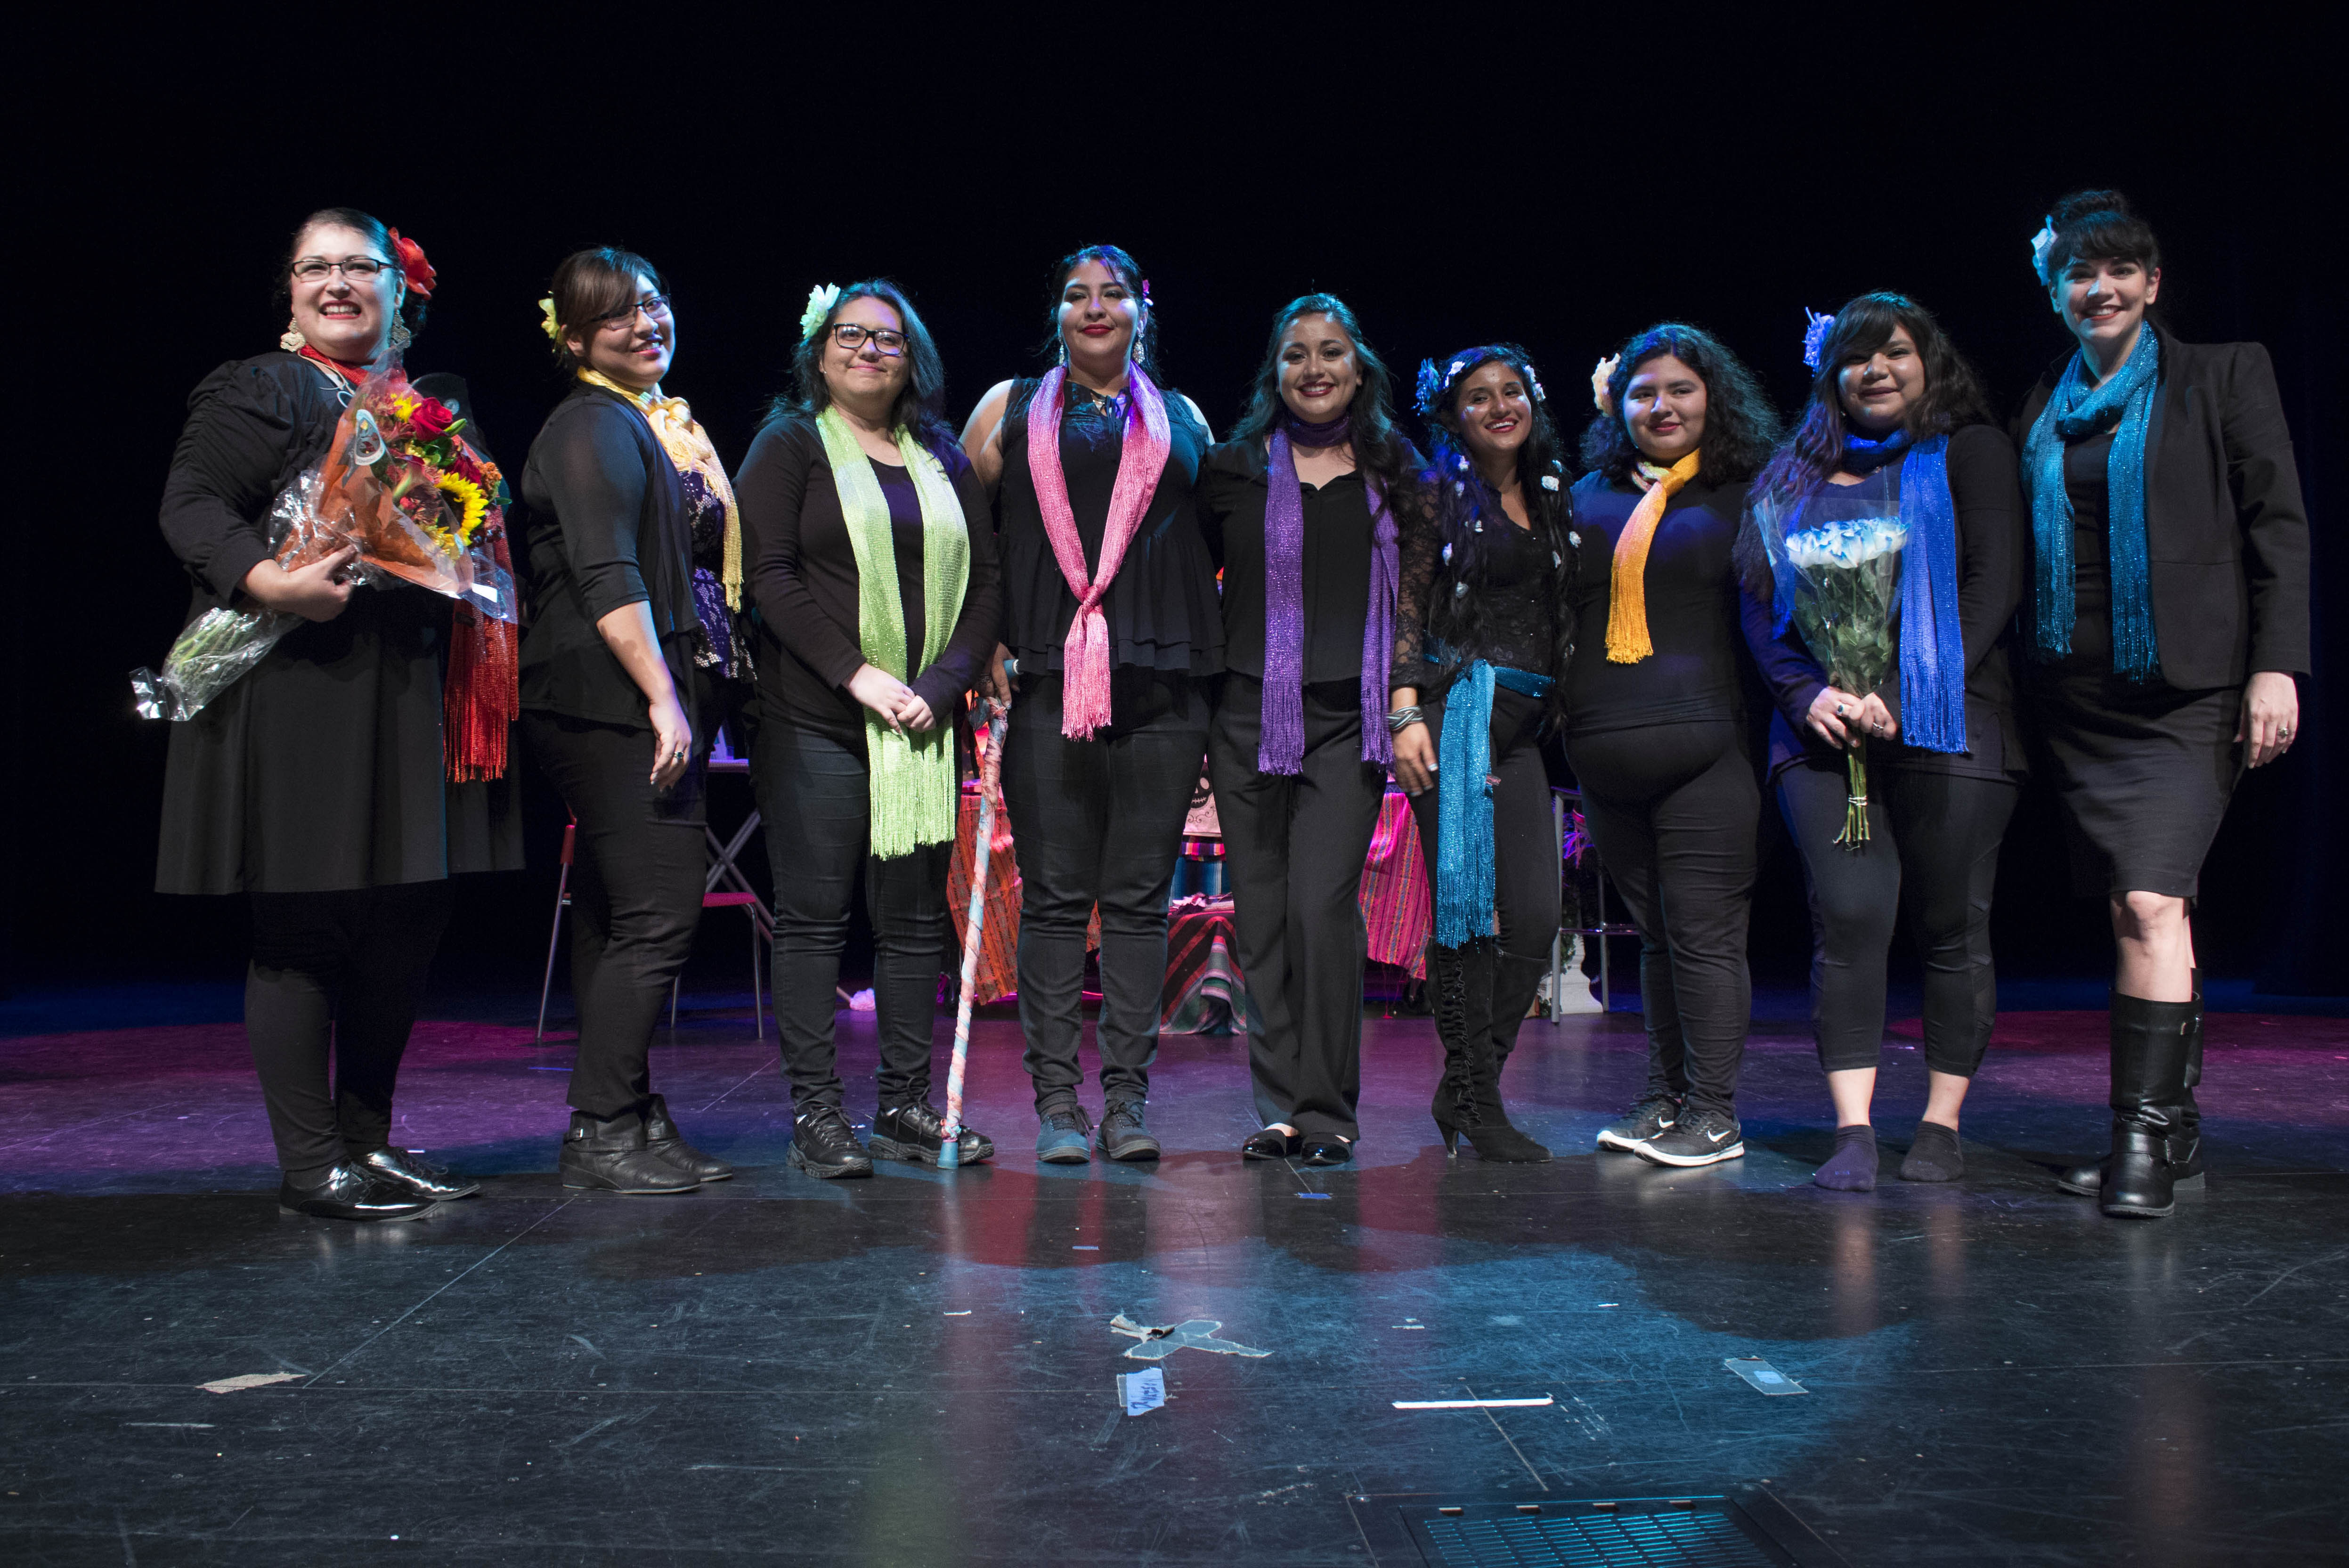 From Left to Right, Monica Cortez, Marissa Luna, Ruth Mini, Sulema Hernadez, Celilia McCardle, Kathryn Pearl, Martha Reyna, Kayla Garcia, and Professor Adrianna Michelle Santos, Ph.D standing together at the end of the preformance. Photo by Josiah Cuellar 